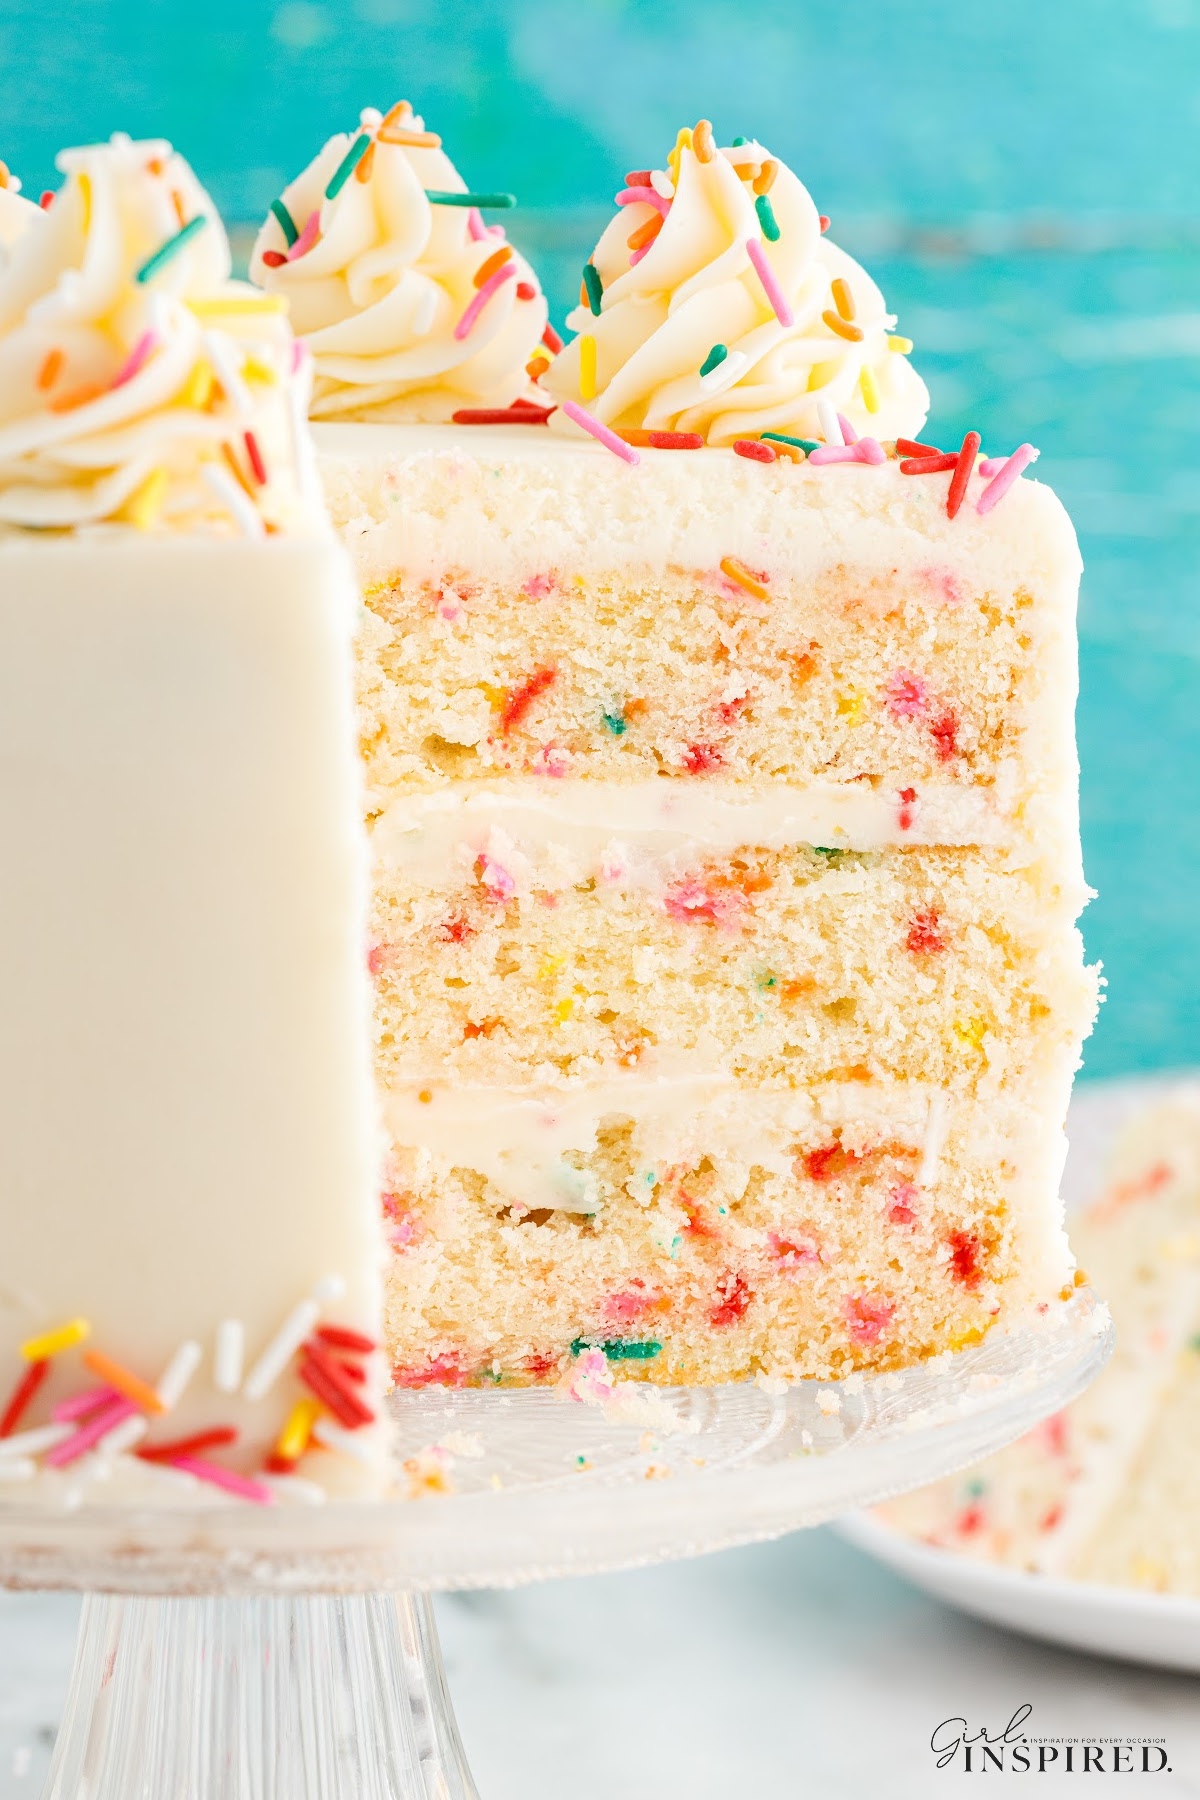 Slices missing from a Funfetti Cake.